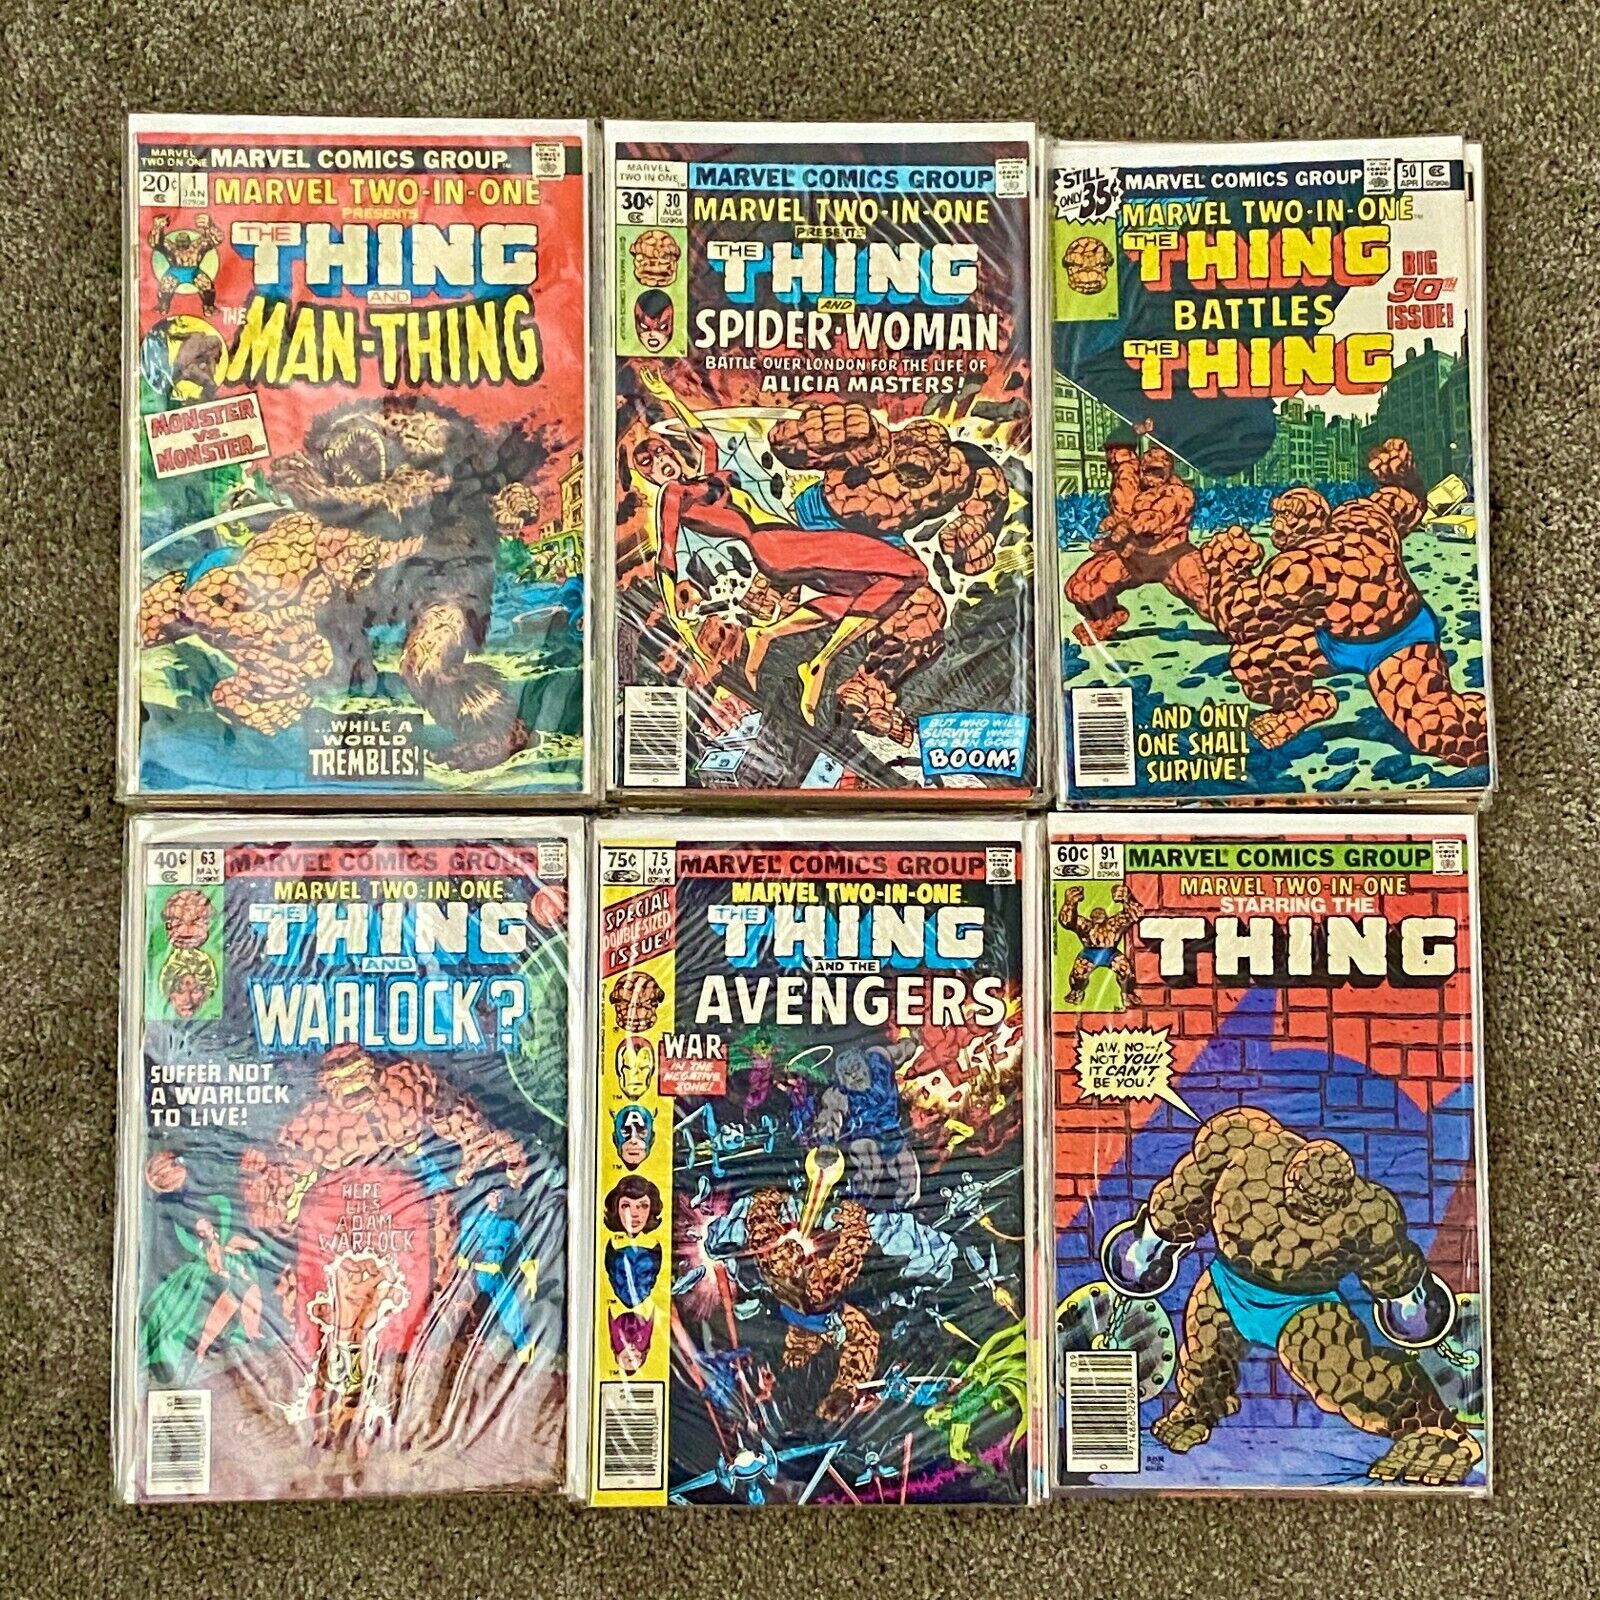 MARVEL TWO IN ONE #1-100 / THING 2 1 BRONZE AGE MARVEL / NEAR COMPLETE FULL RUN